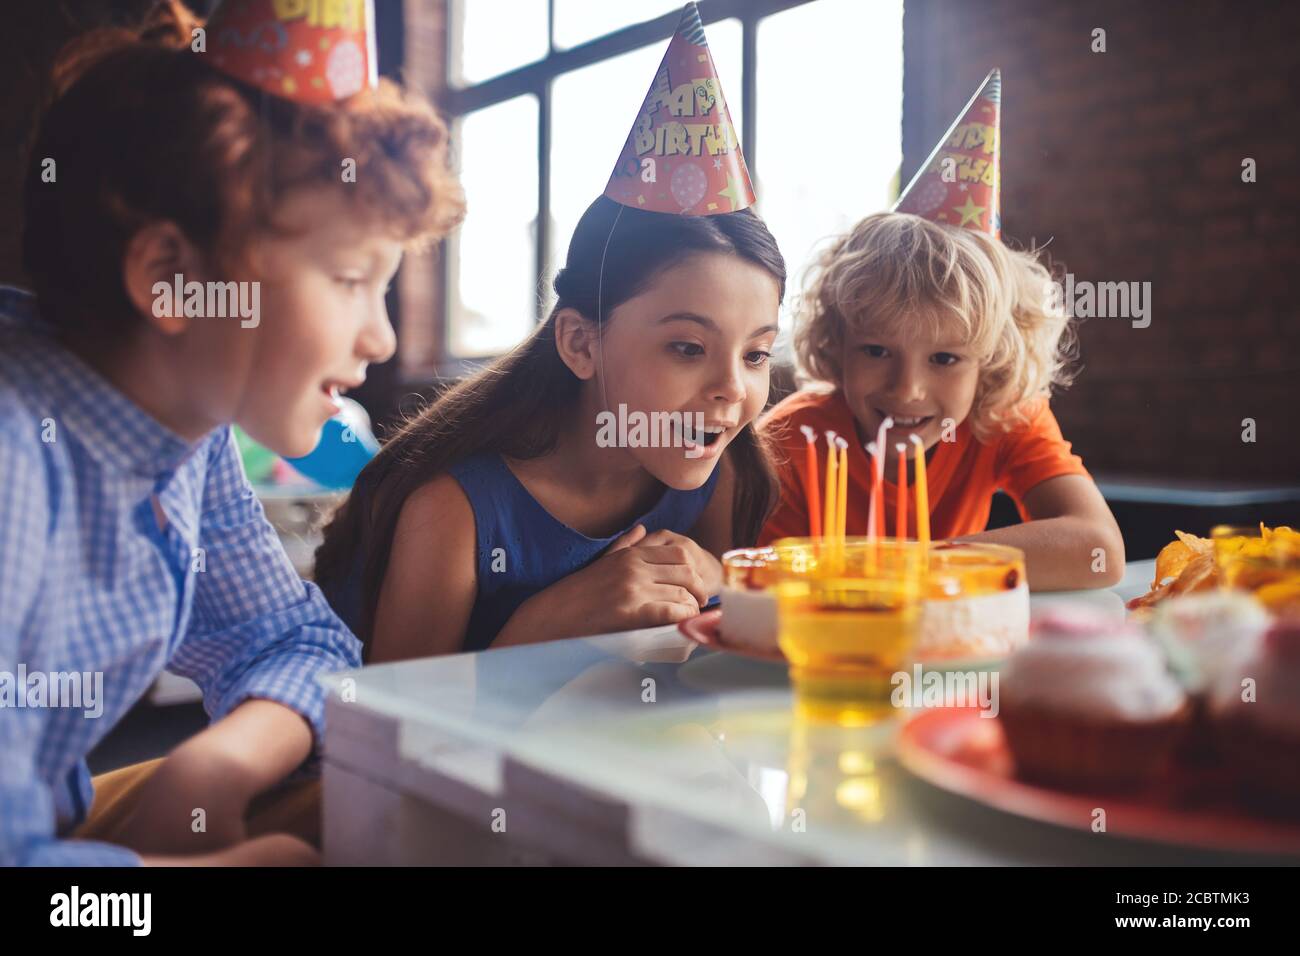 Three kids looking at the cake and feeling amused Stock Photo